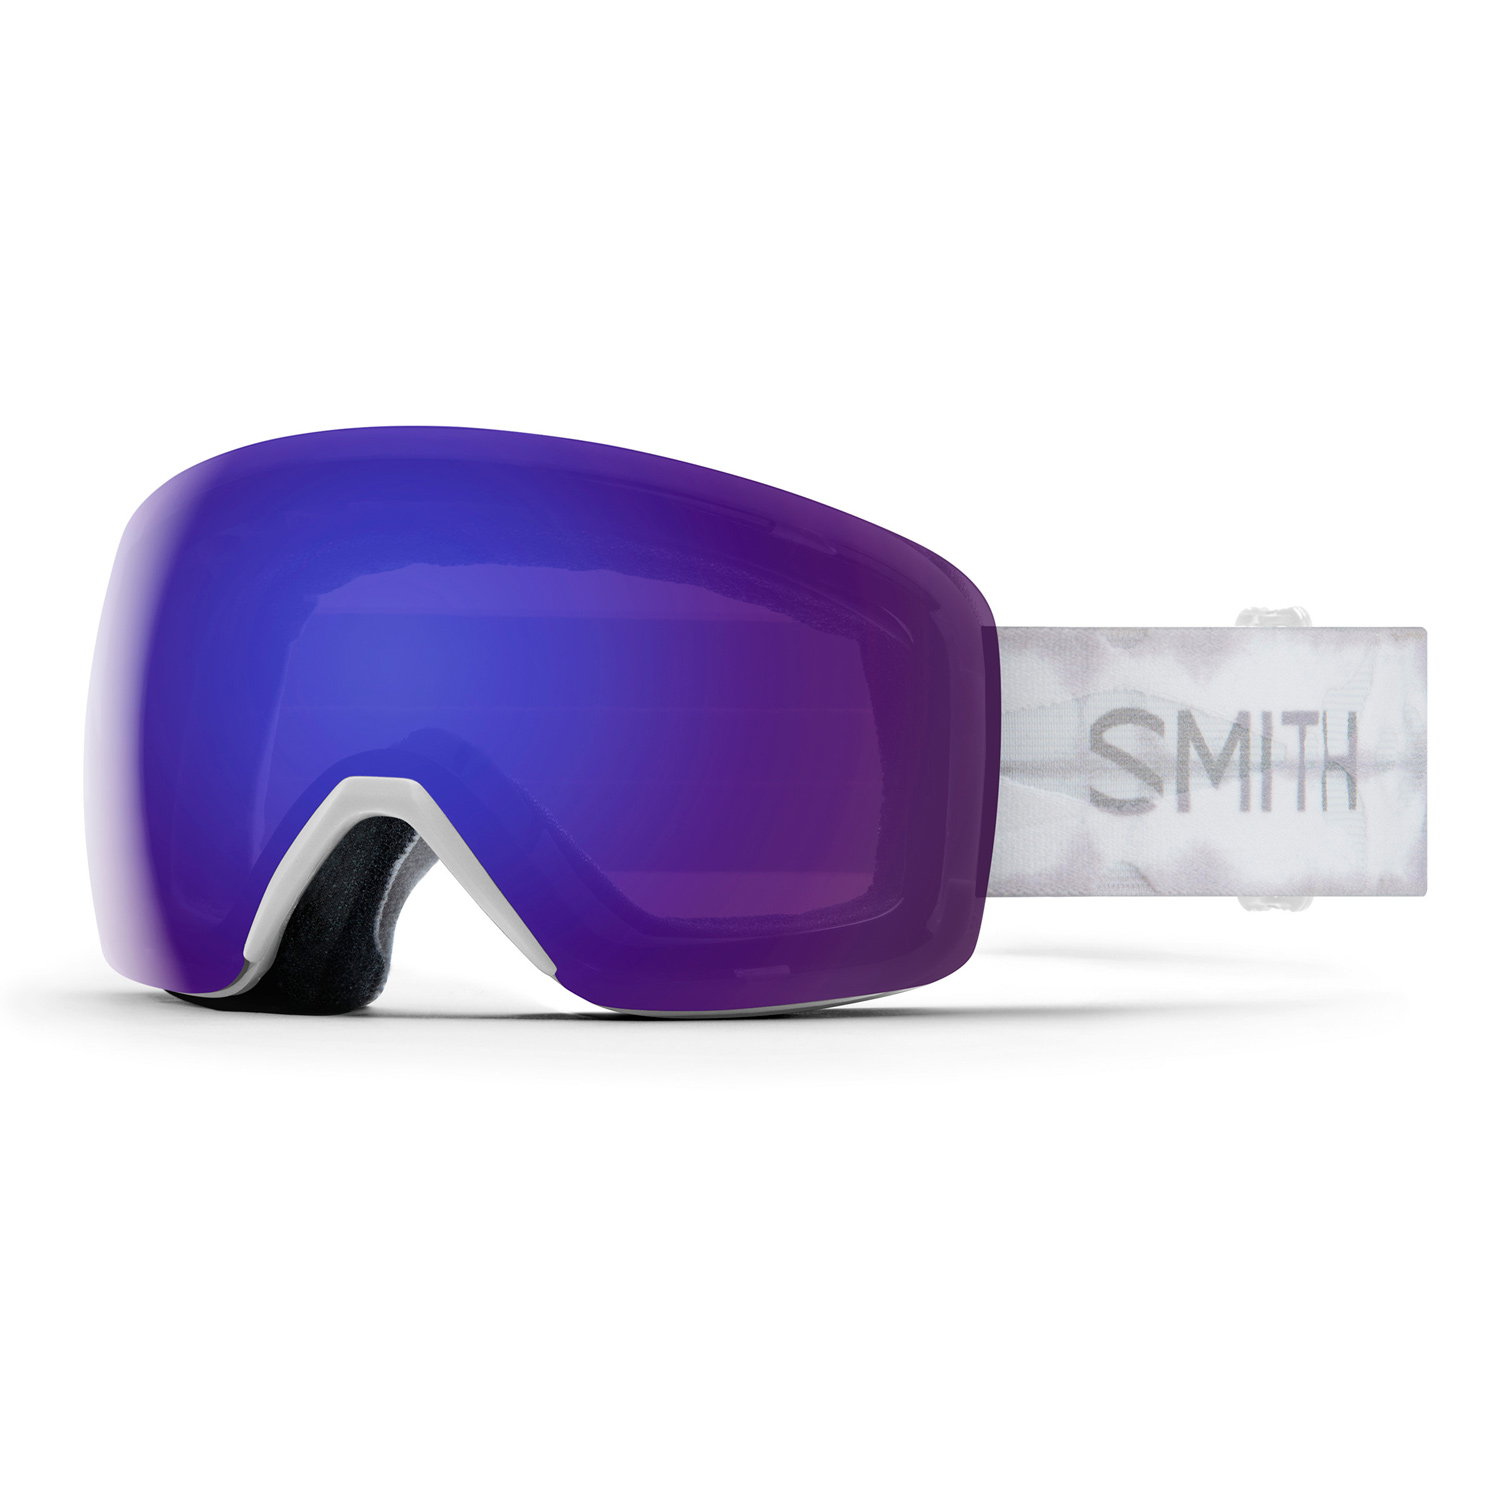 home newspaper Not complicated 2022 Smith Skyline Snow Goggles - White Shibori Dye / ChromaPop Violet  Mirror | Coast Water Sports | Great Deals on Sailing Clothing | Drysuits  and Watersports Equipment